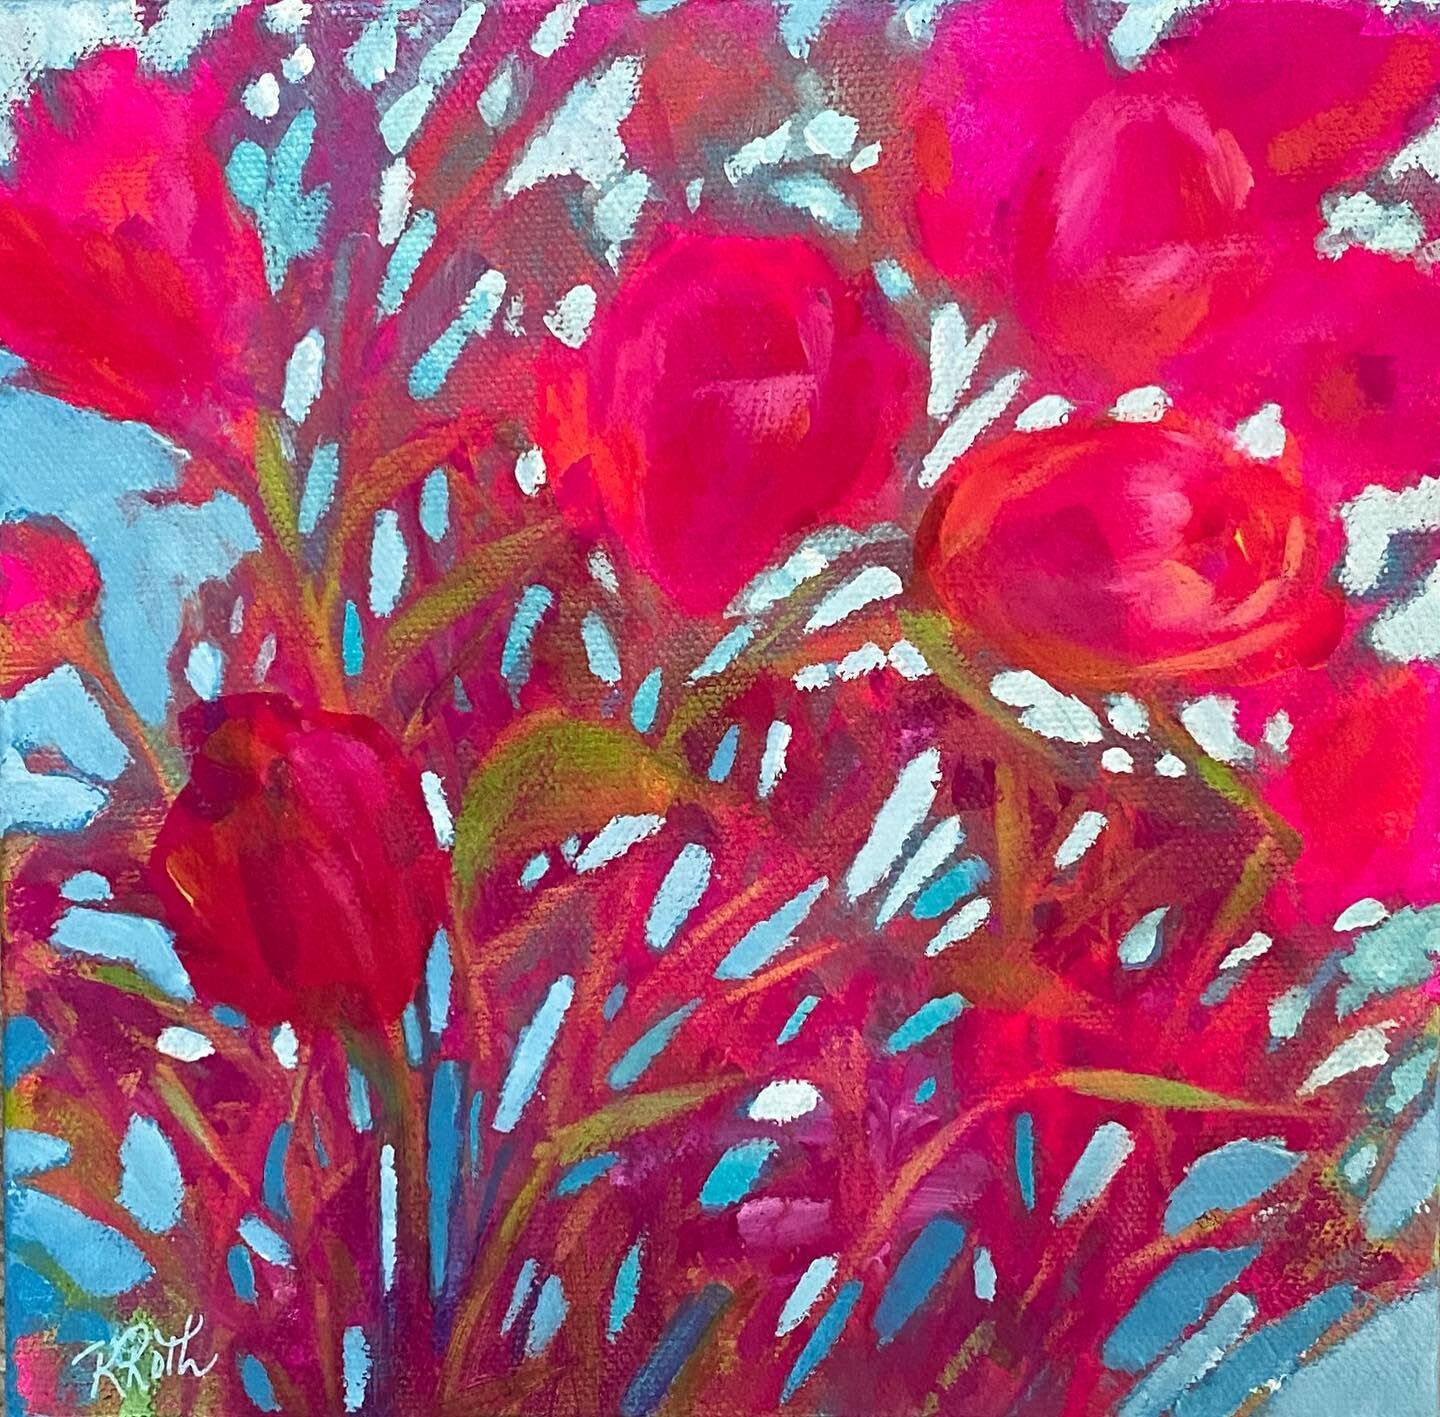 Can you tell I enjoy negative painting?  Ha! Ha!  I know tulip season is over but that&rsquo;s what seemed to emerge outta the initial layers.  Had to go with the flow! New 8x8&rdquo; mini that I&rsquo;m thinking of putting into an upcoming fall show